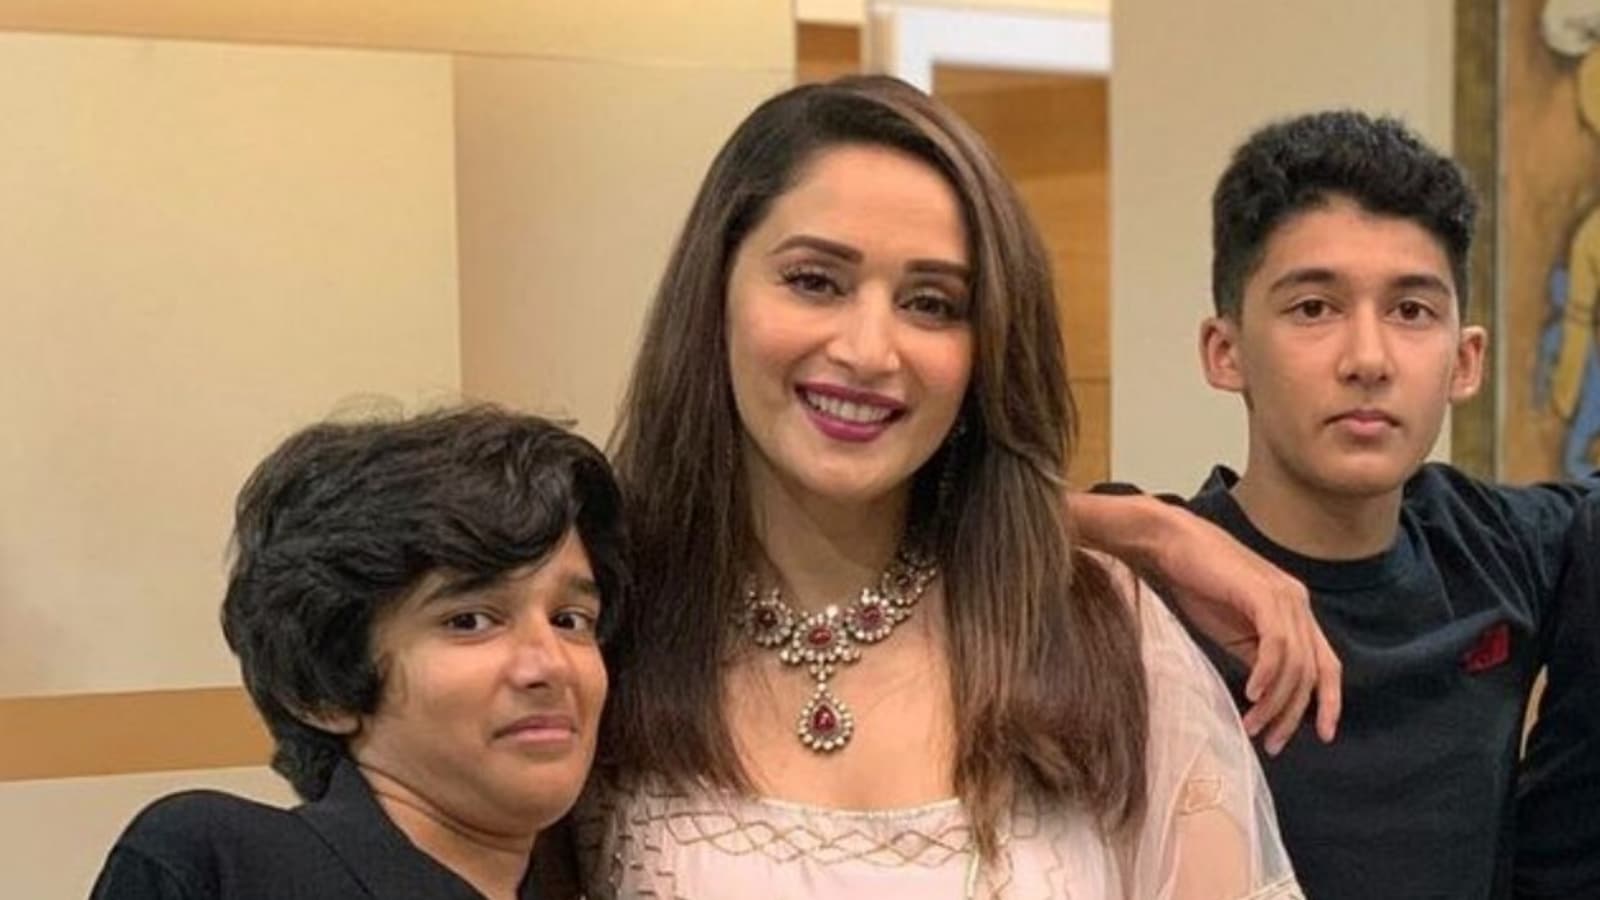 Madhuri Dixit Xxx Videos Only Jamuna - Madhuri Dixit recalls when her son's friend said: 'You're lucky she is your  mom' | Bollywood - Hindustan Times